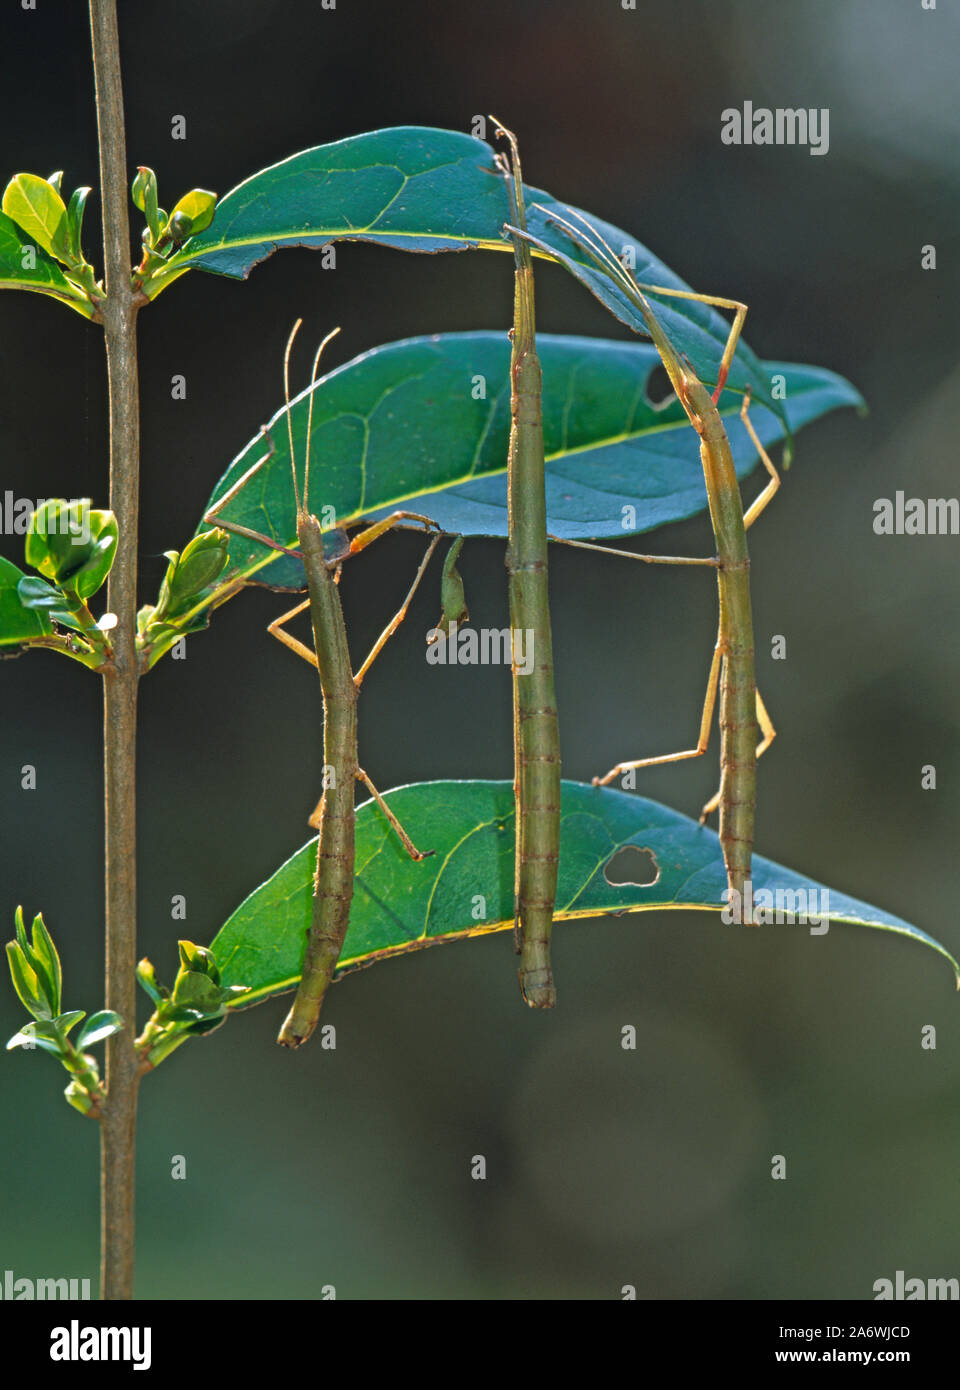 INDIAN STICK INSECTS (Carausius morosus).  Three individuals on Privet twig (food plant). Illustrating mimicry. Stock Photo